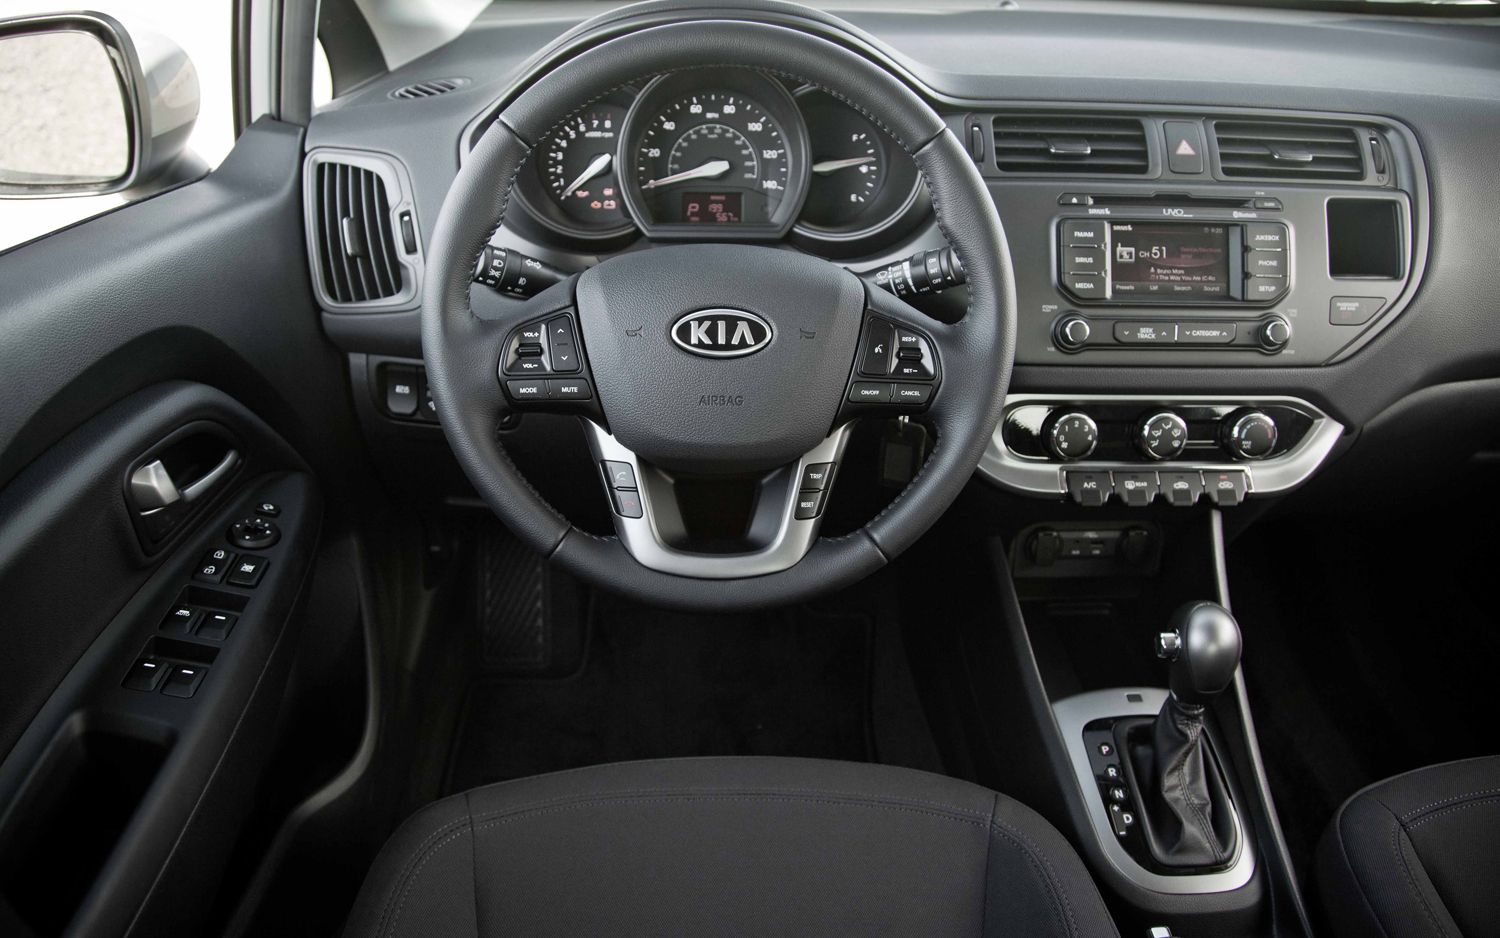 2012 Kia Rio interior Photo on July 3, 2012 #227405 from WOT on ...